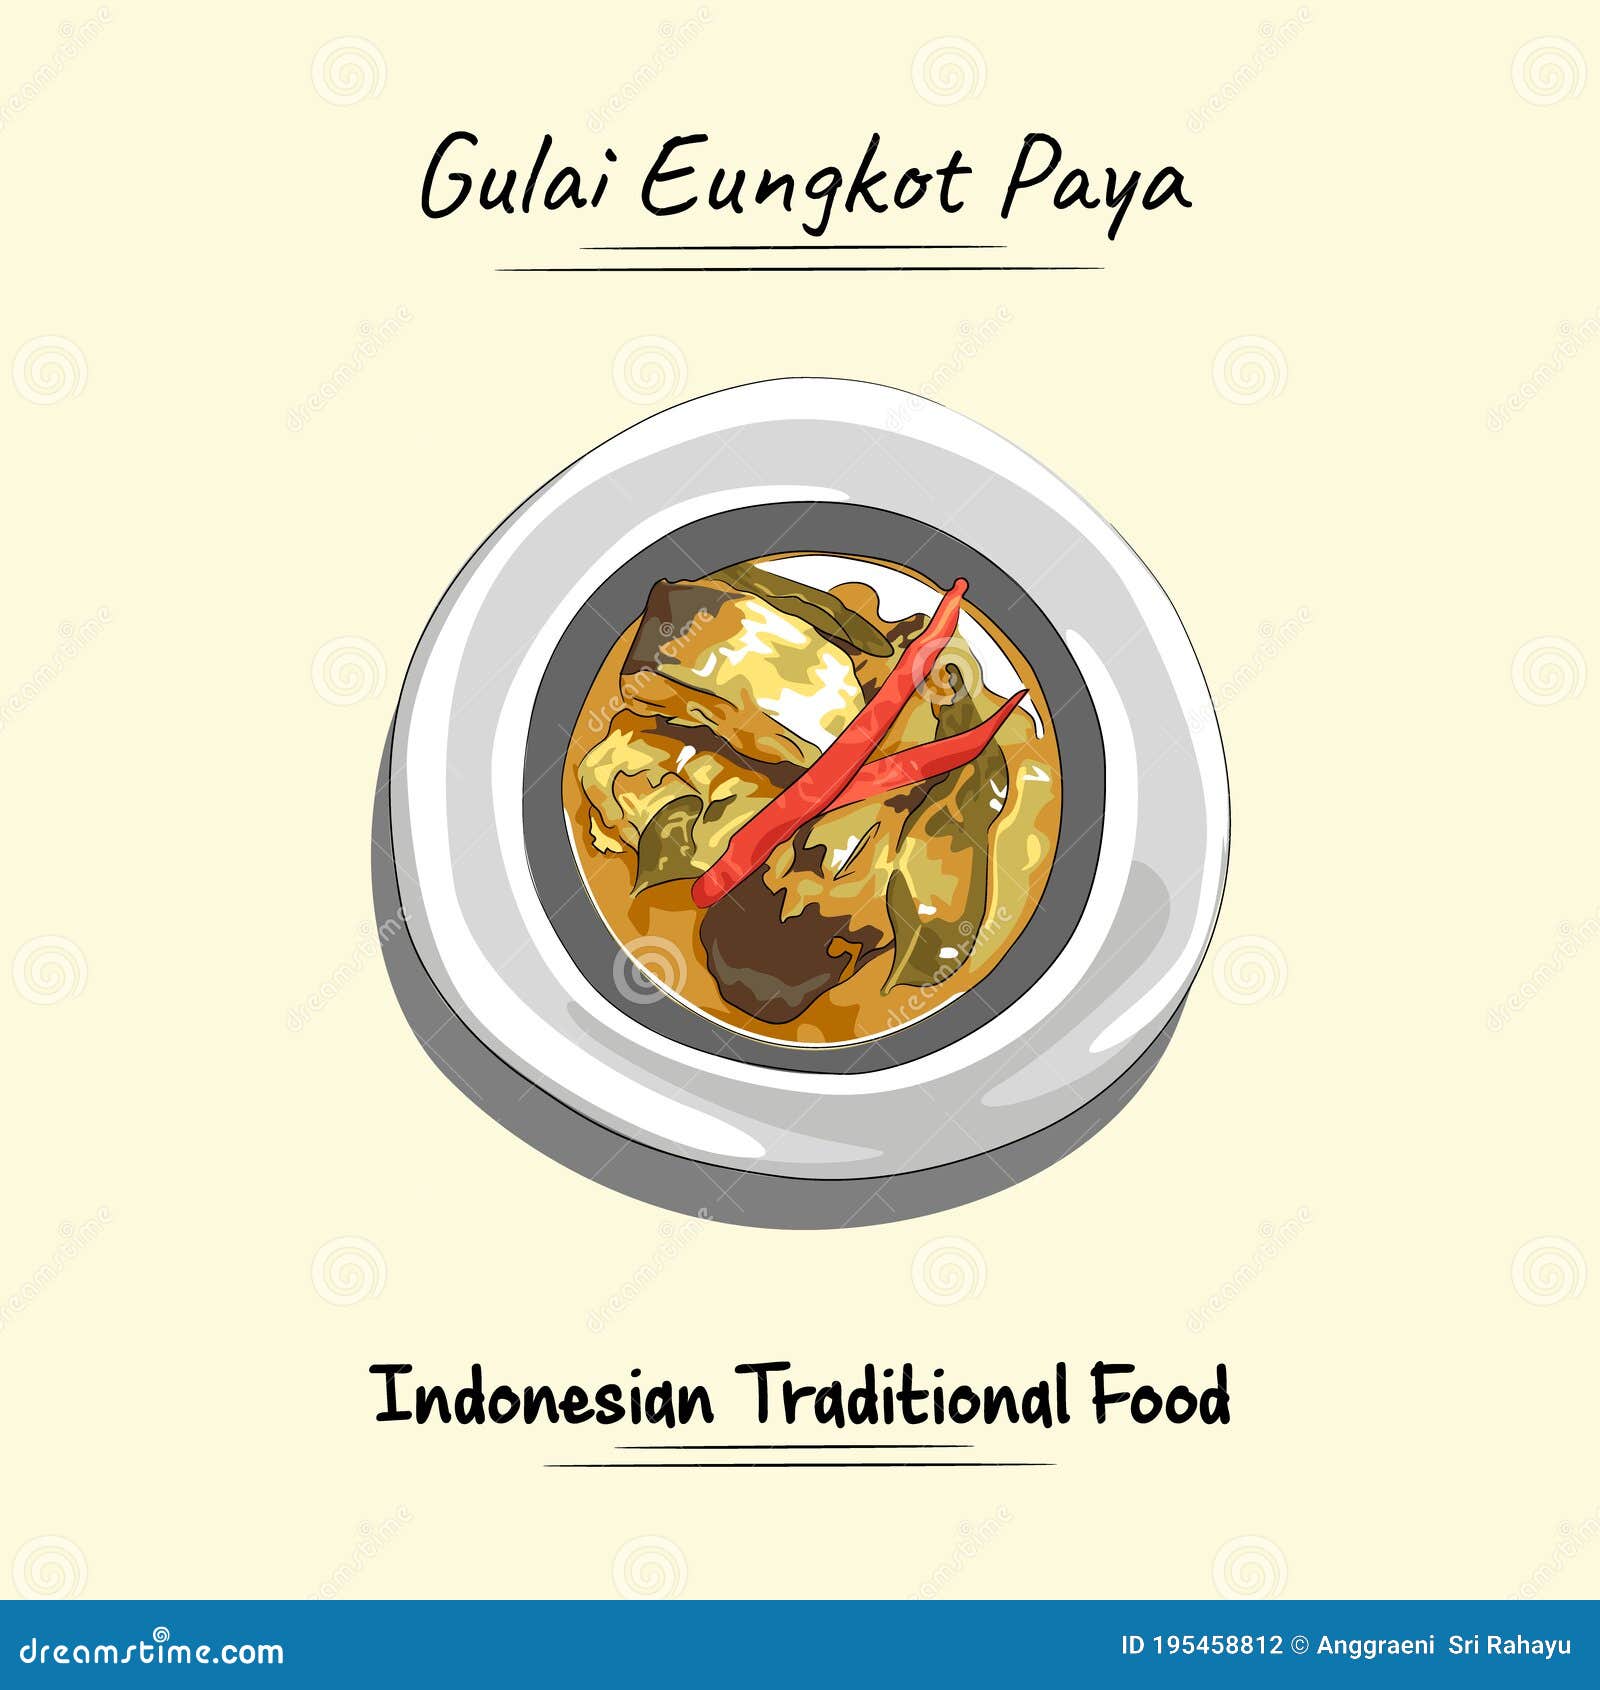 curry eungkot paya  indonesian food from aceh, sketch &  style